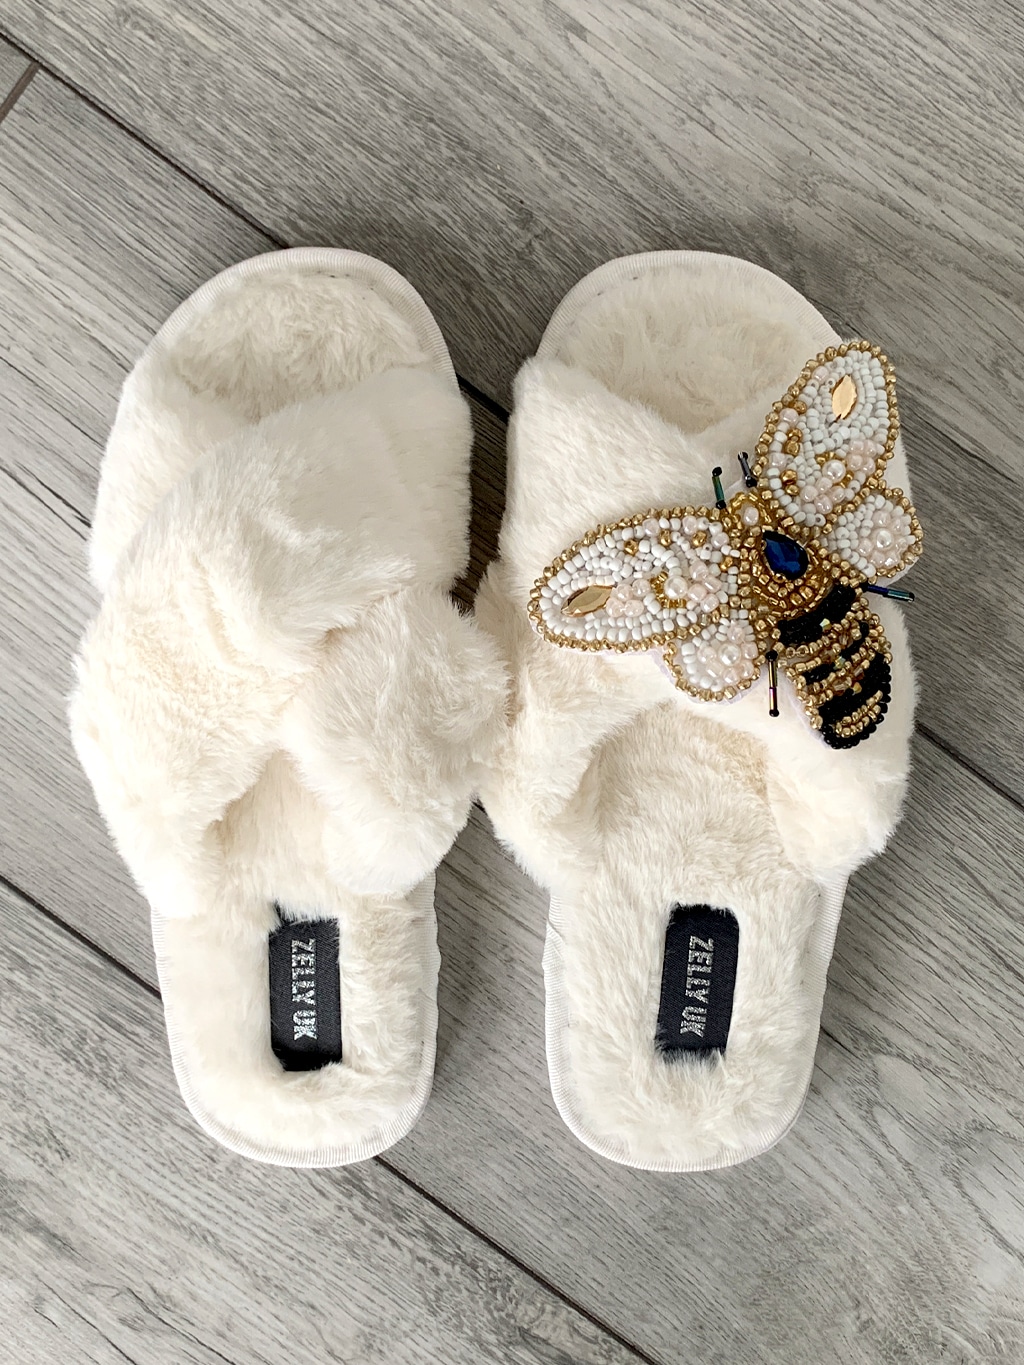 Cream slippers with bee embellishment